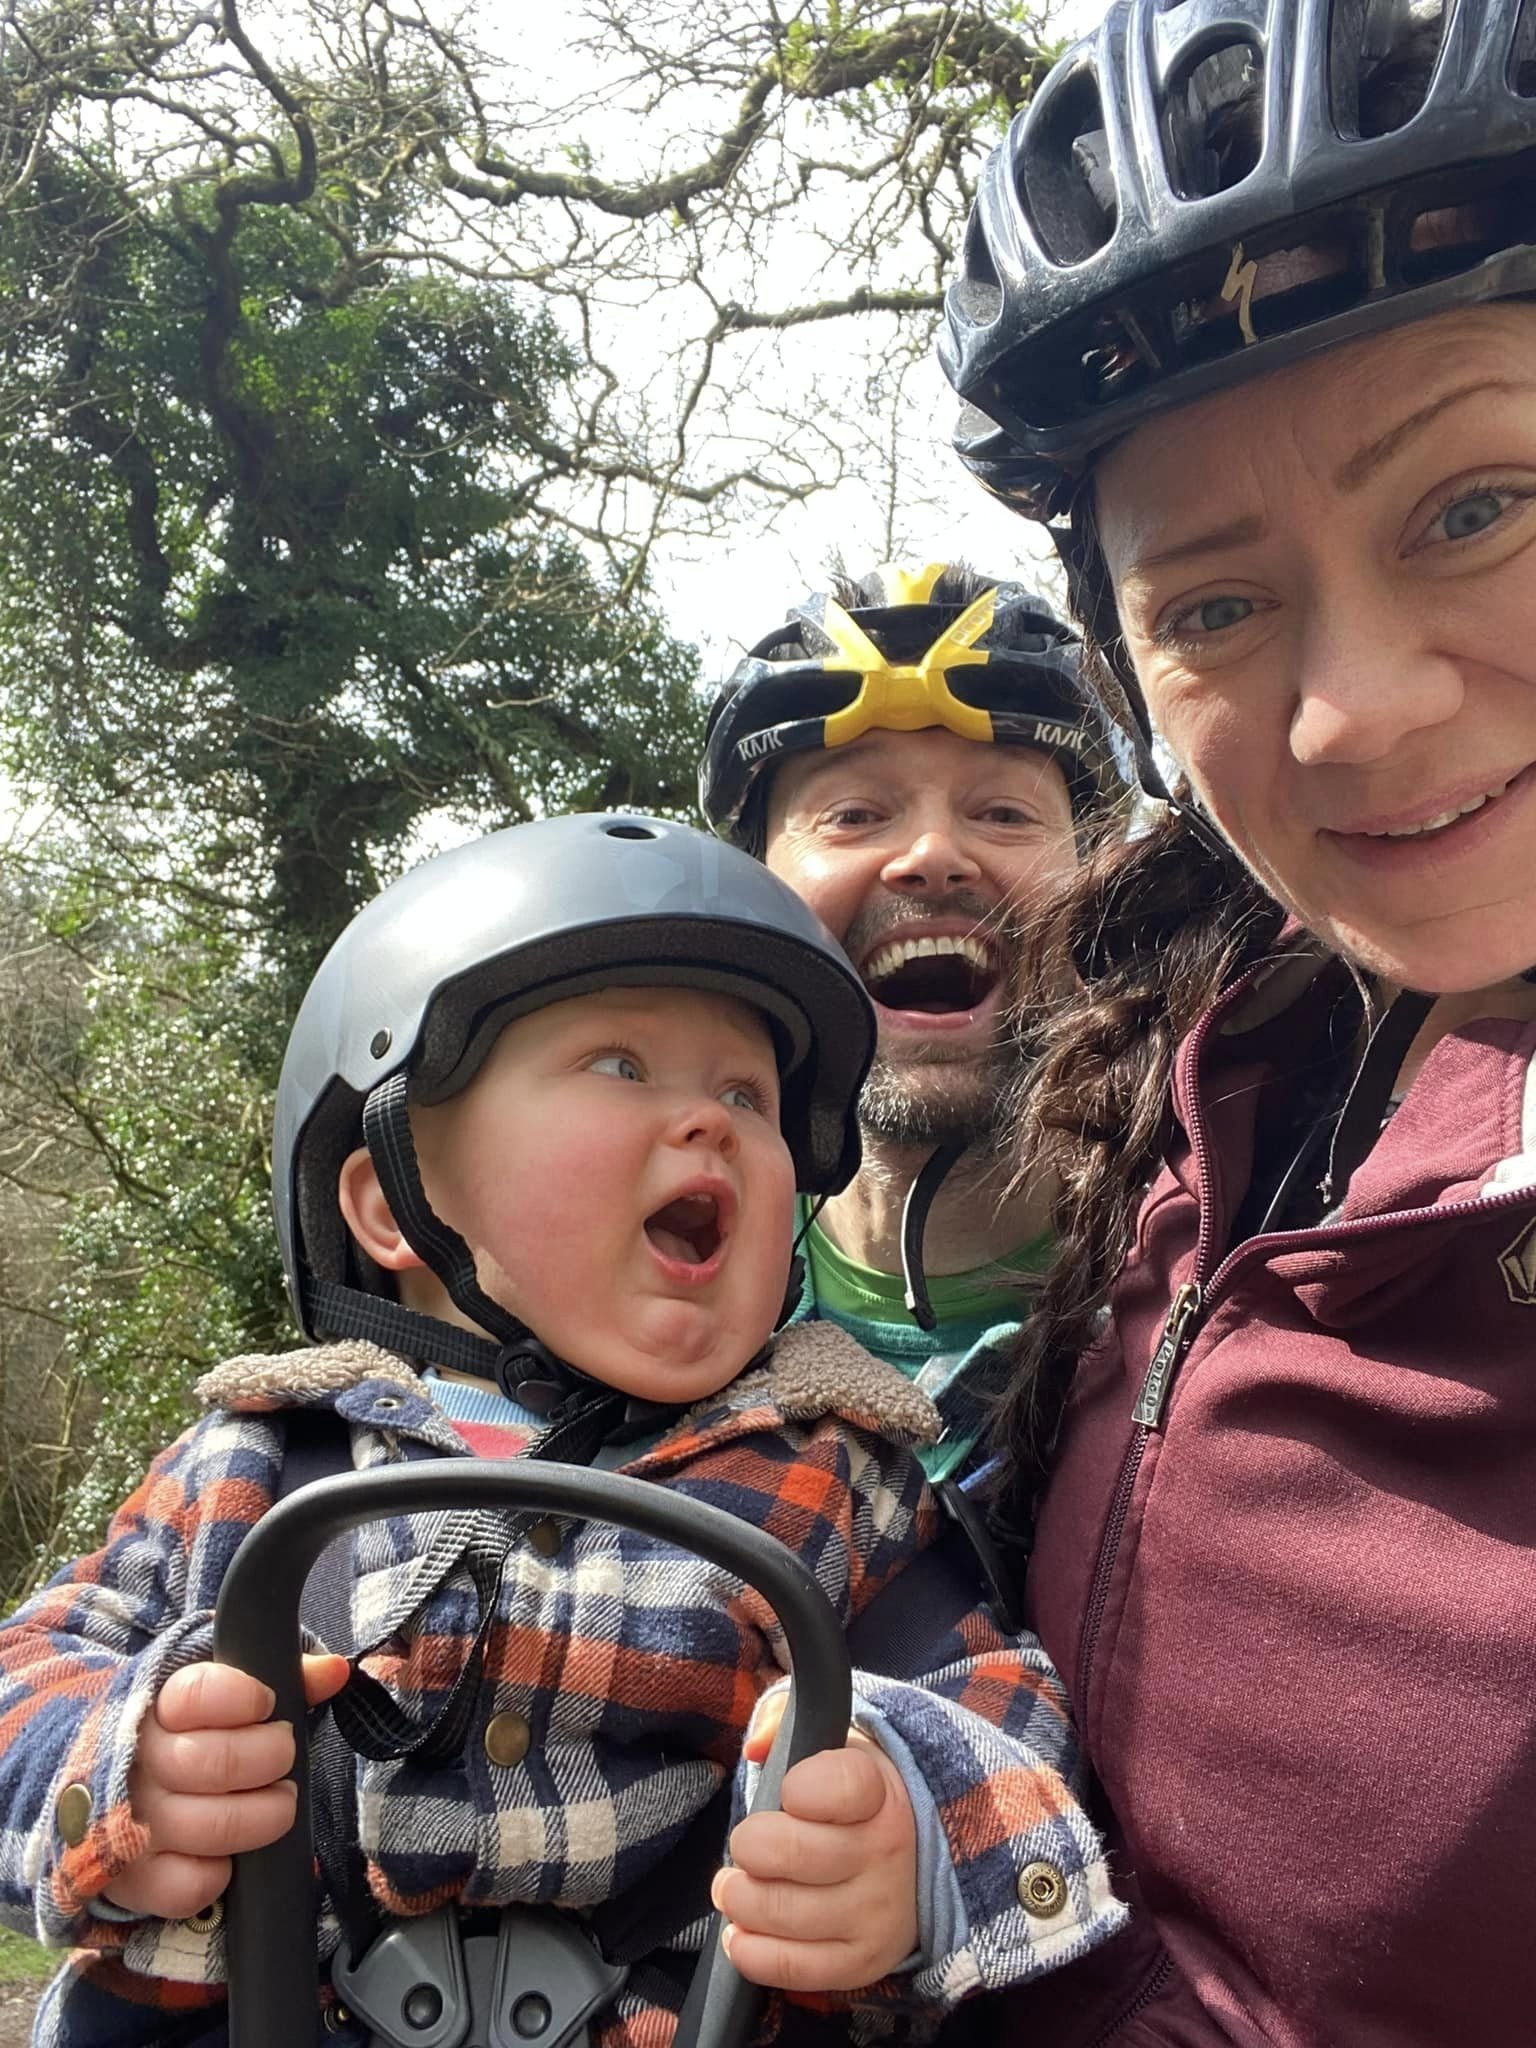  Lennie loving a family day out biking the Camel Trail in Cornwall! 